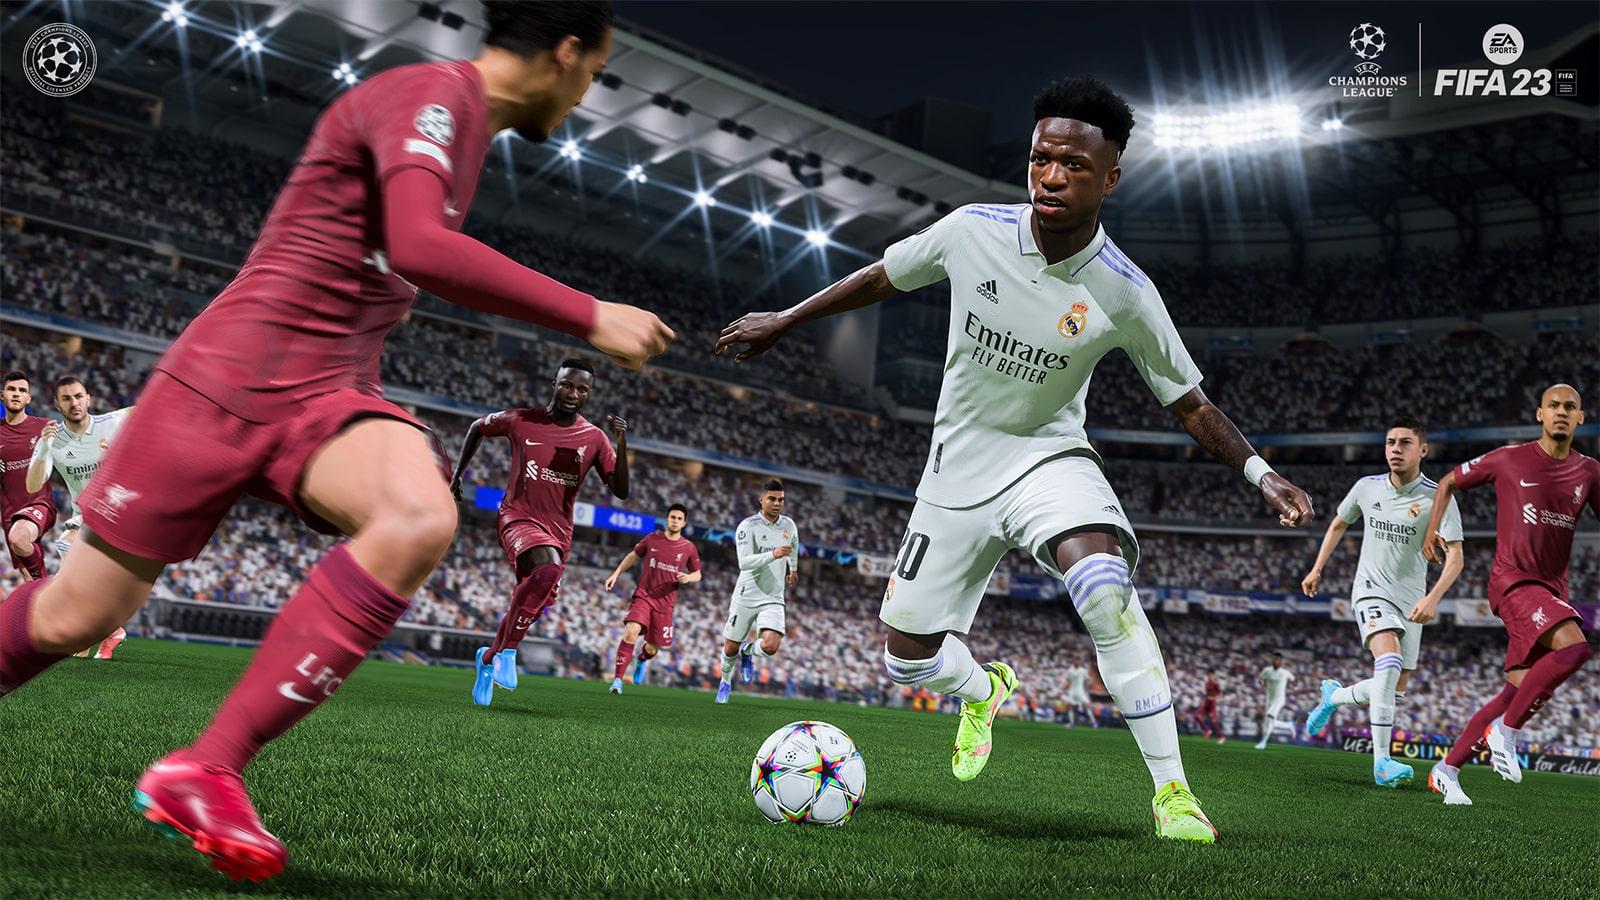 FIFA 22 system requirements